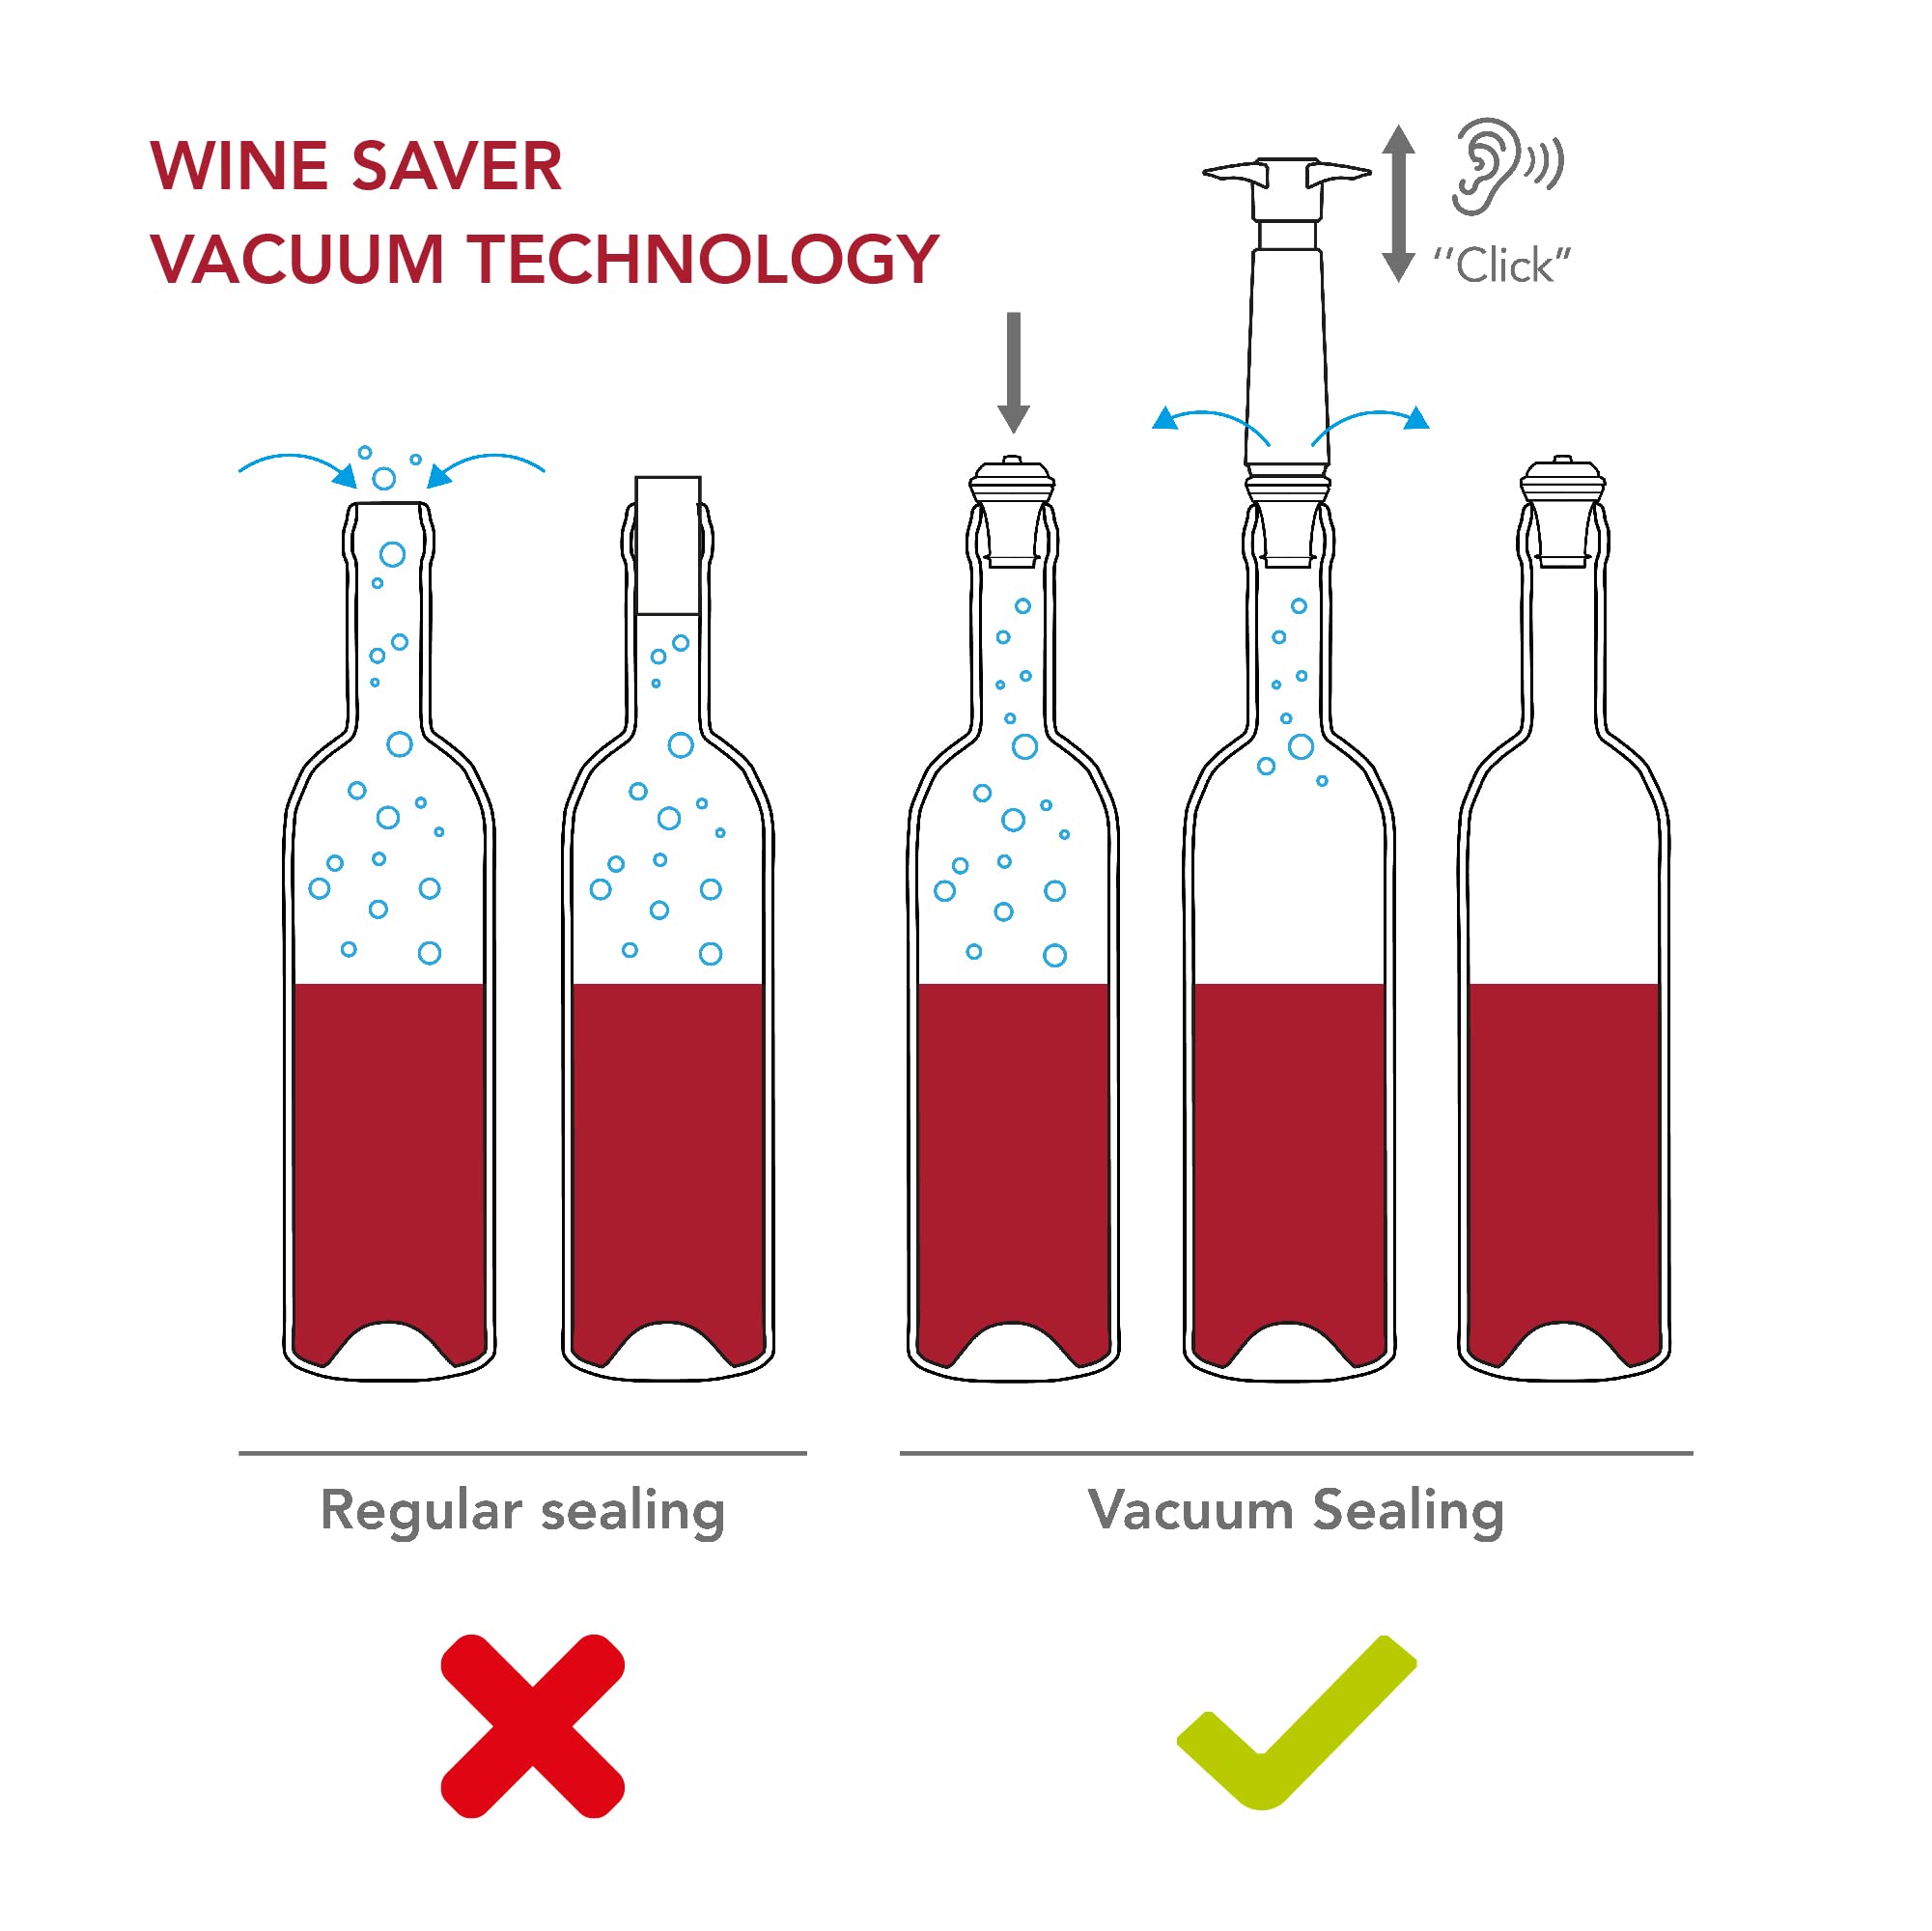 Vacu Vin Wine Saver Vacuum Stoppers - Set of 8 - Gray - for Wine Bottles - Keep Wine Fresh for Up to a Week with Airtight Seal - Compatible with Vacu Vin Wine Saver Pump